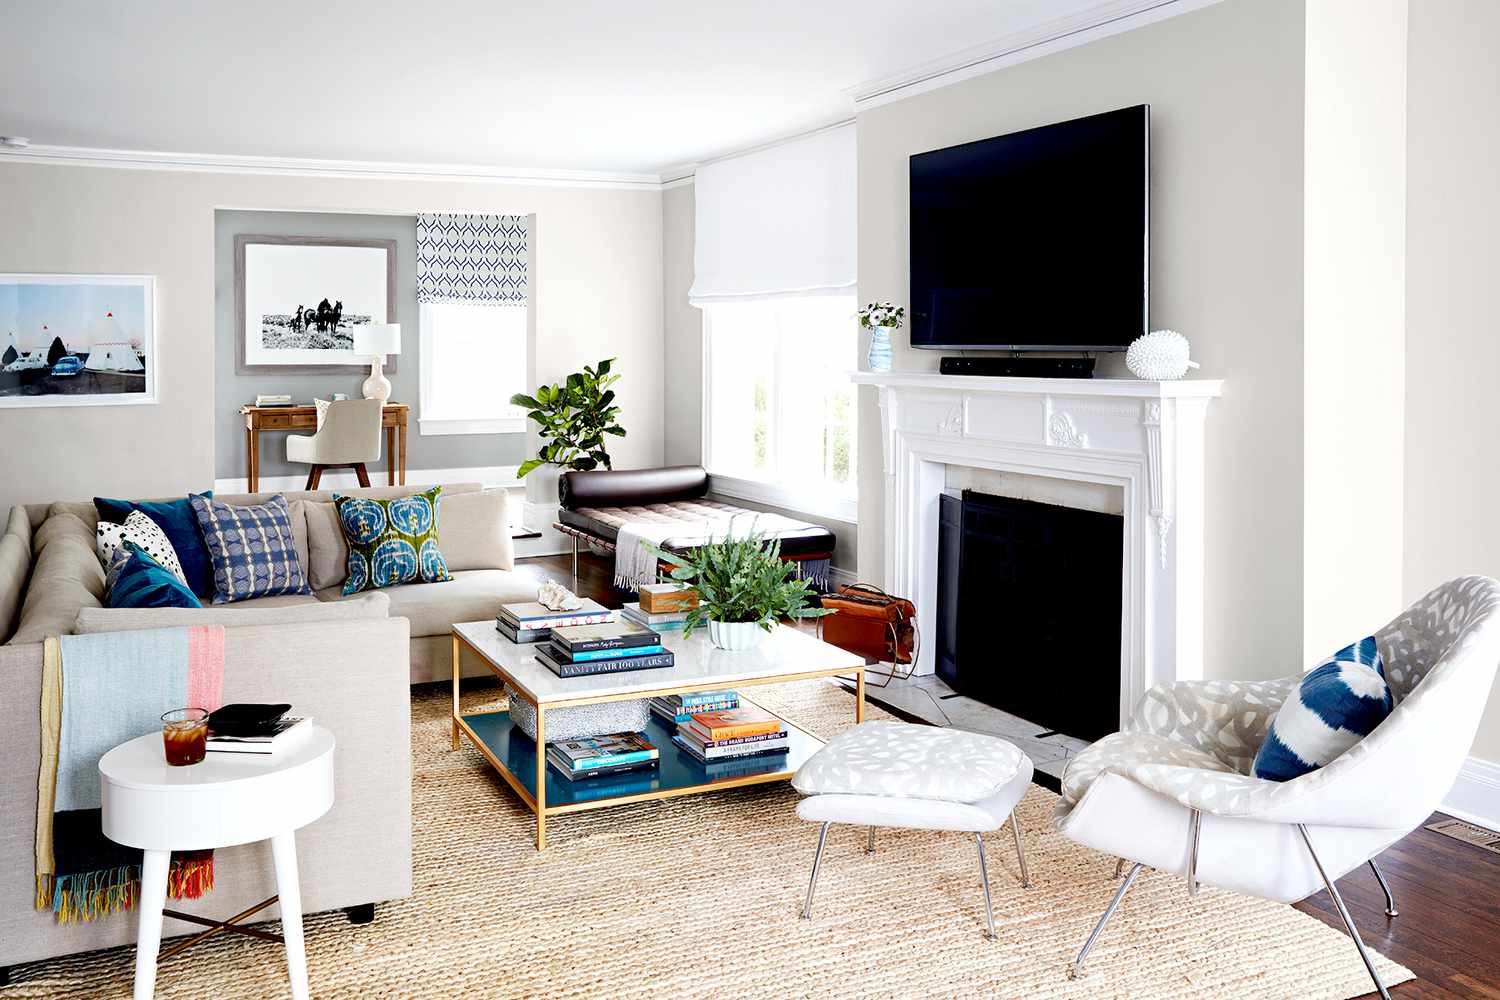 16 Clever Ways To Use Furniture For Living Room Storage Better Homes Gardens